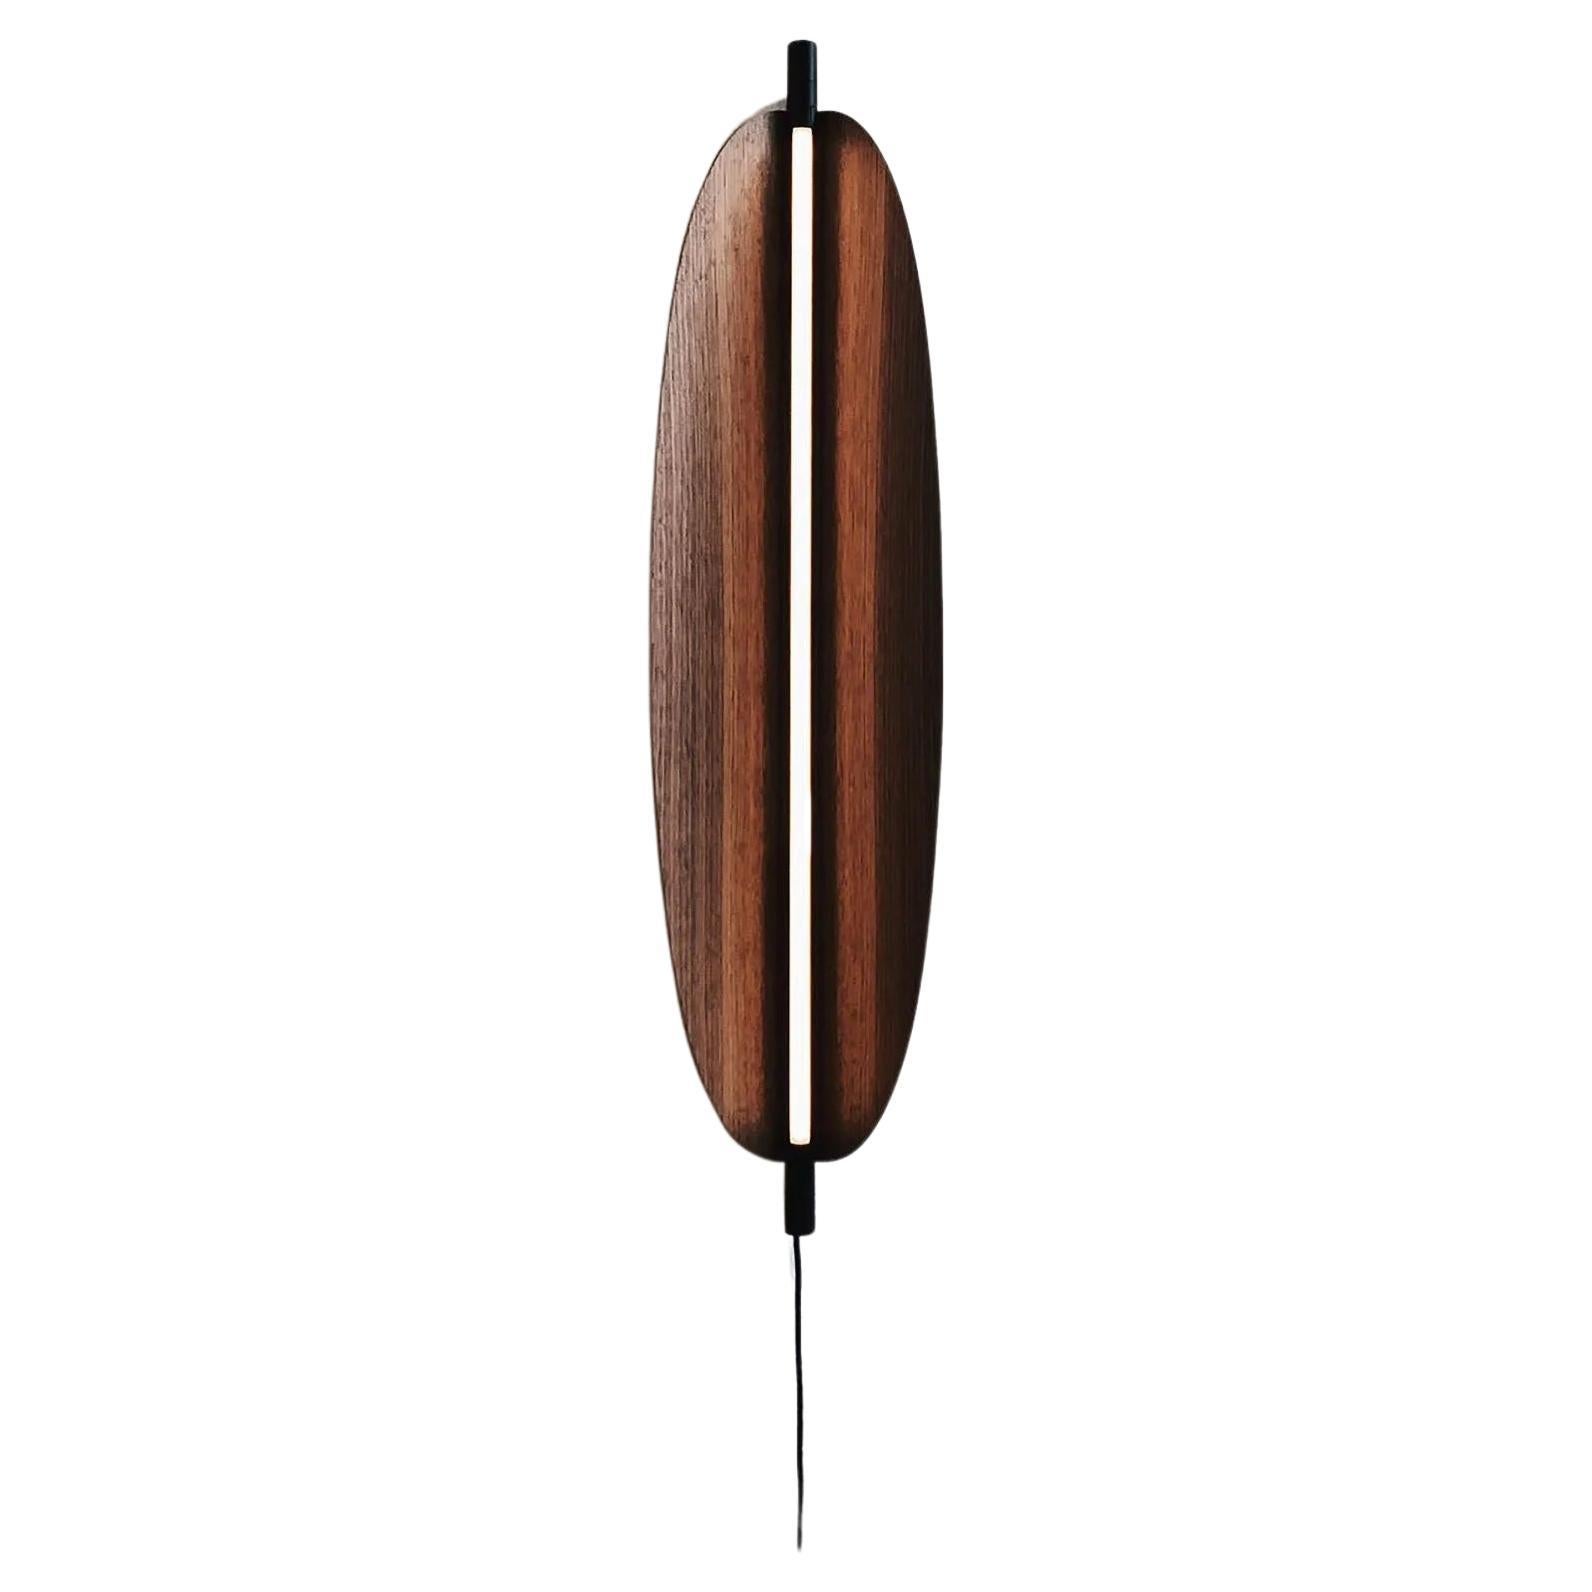 Contemporary Wall Lamp 'Thula 562.42' by Federica Biasi x Tooy, Black + Walnut For Sale